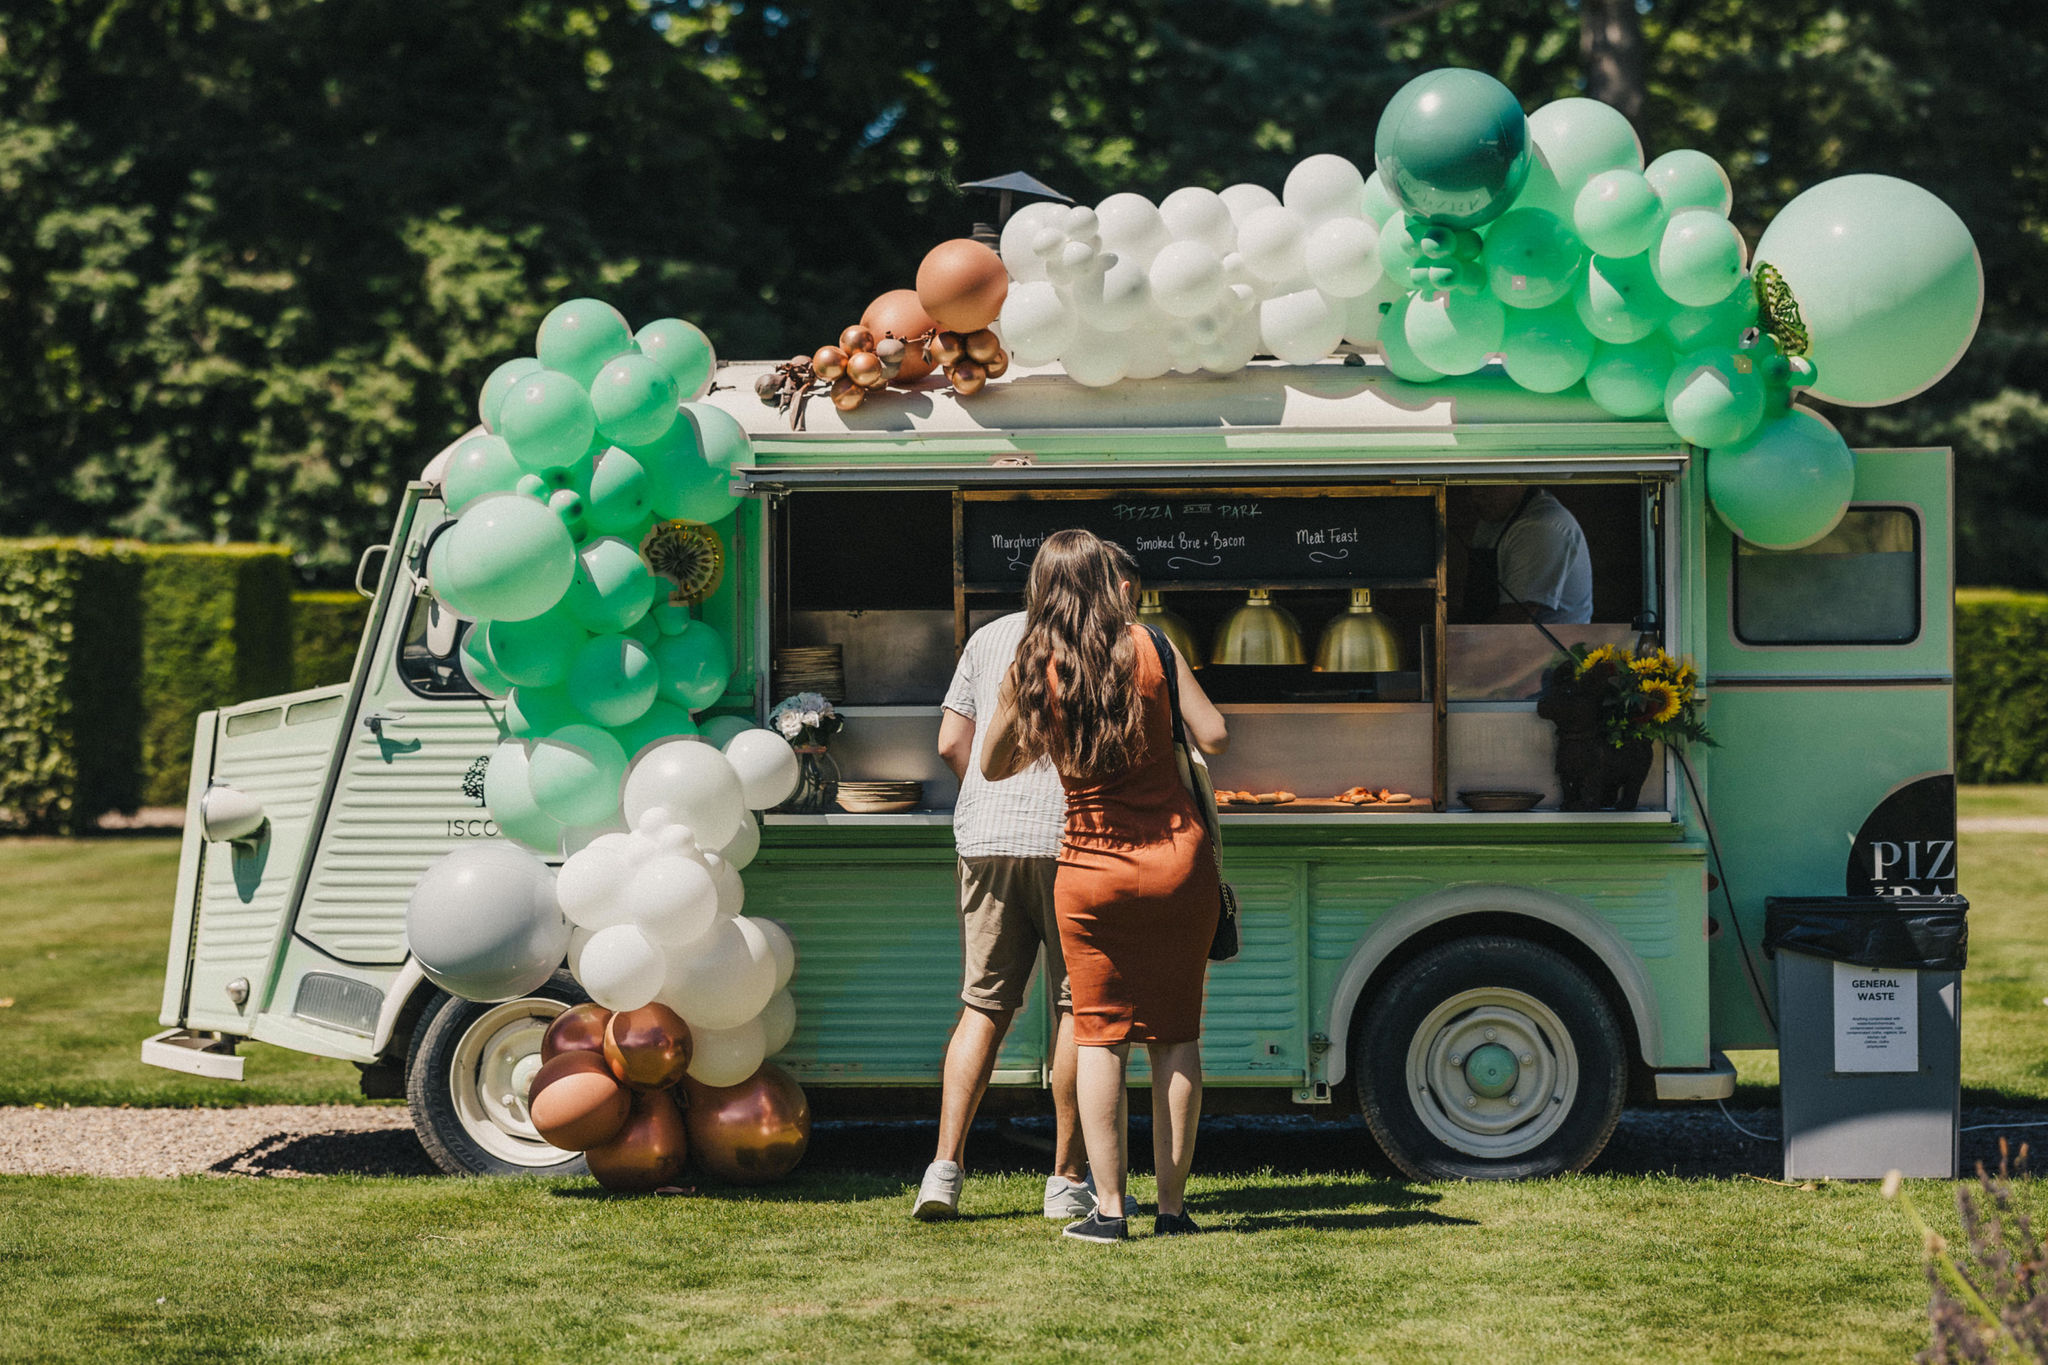 A mint green vintage food truck serves two people freshly made pizza under blue skies